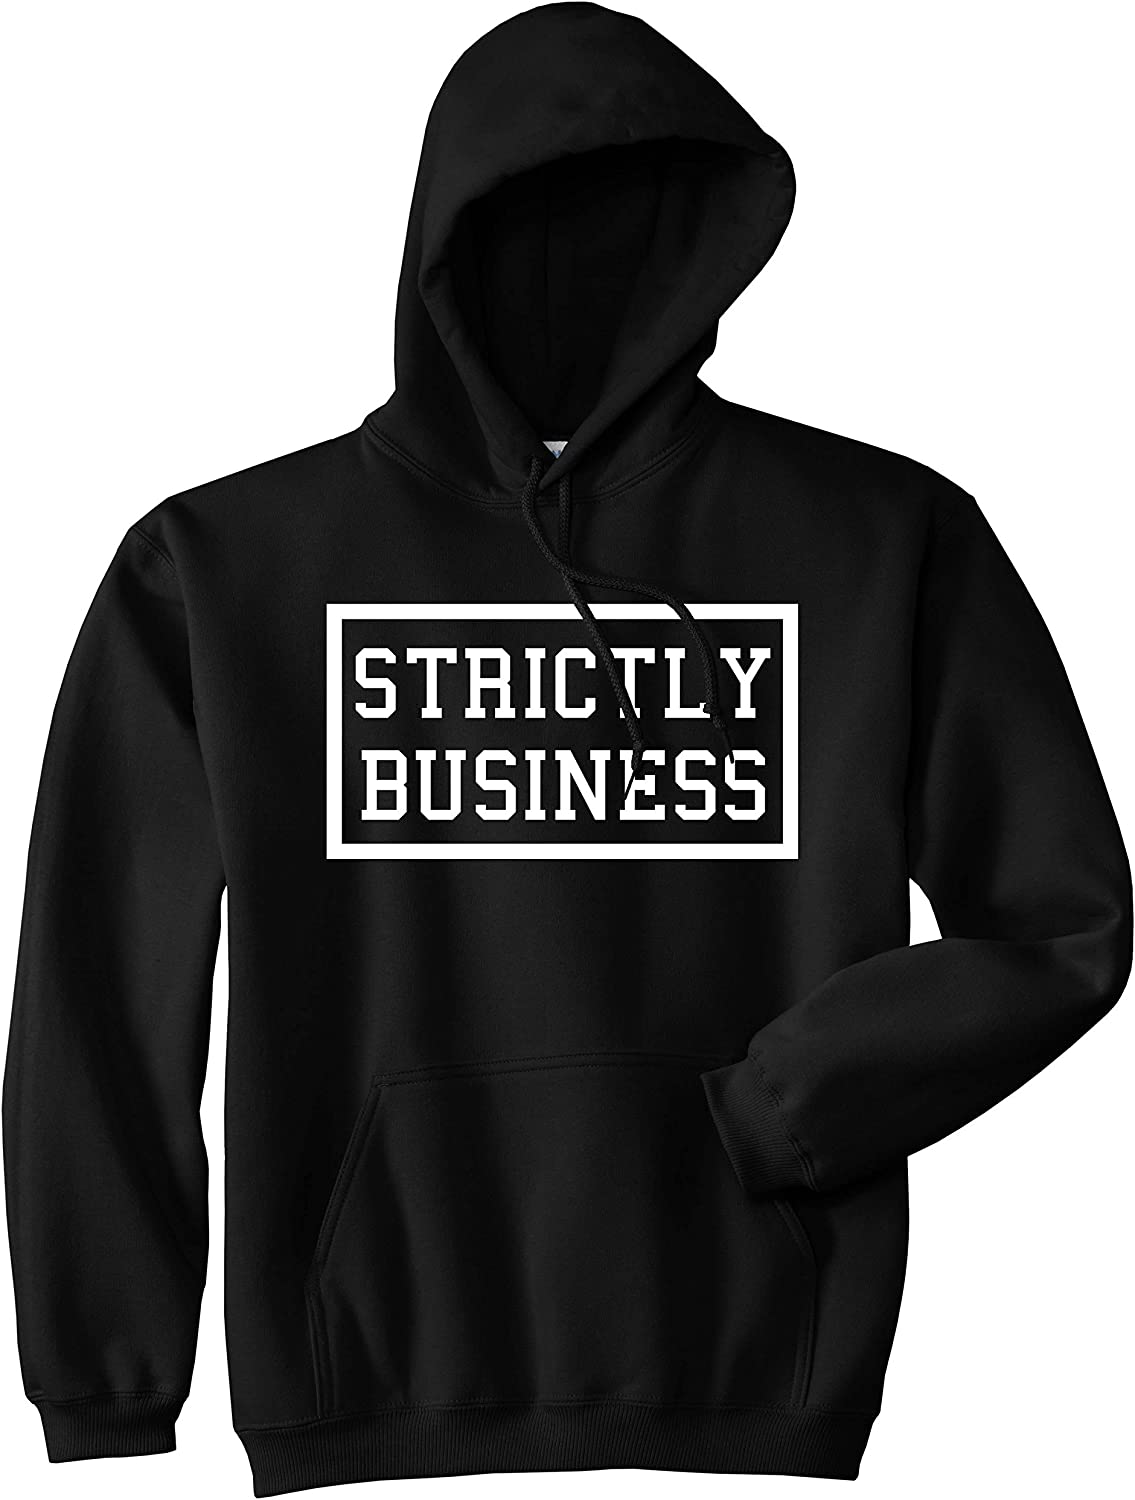 a picture showing an example of unique hoodies people look for but nobody offers yet